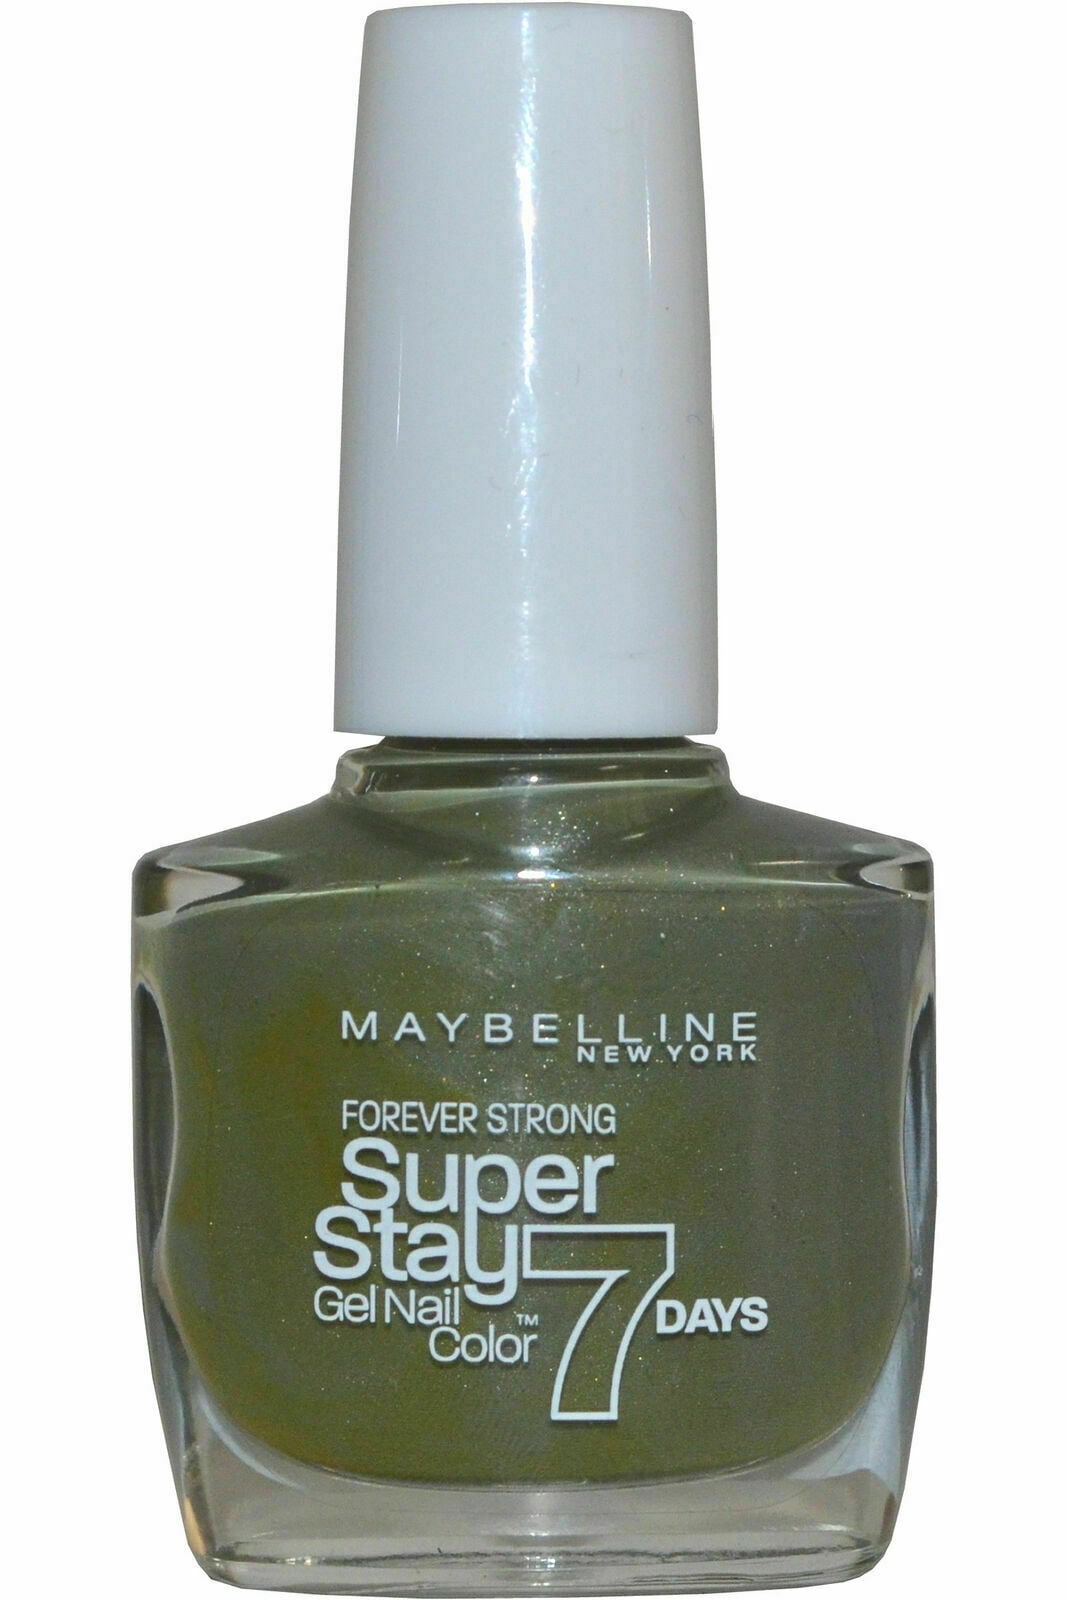 Day Stay Strong Moss Forever Forever GEL #620 Polish Maybelline 7 Nail Super